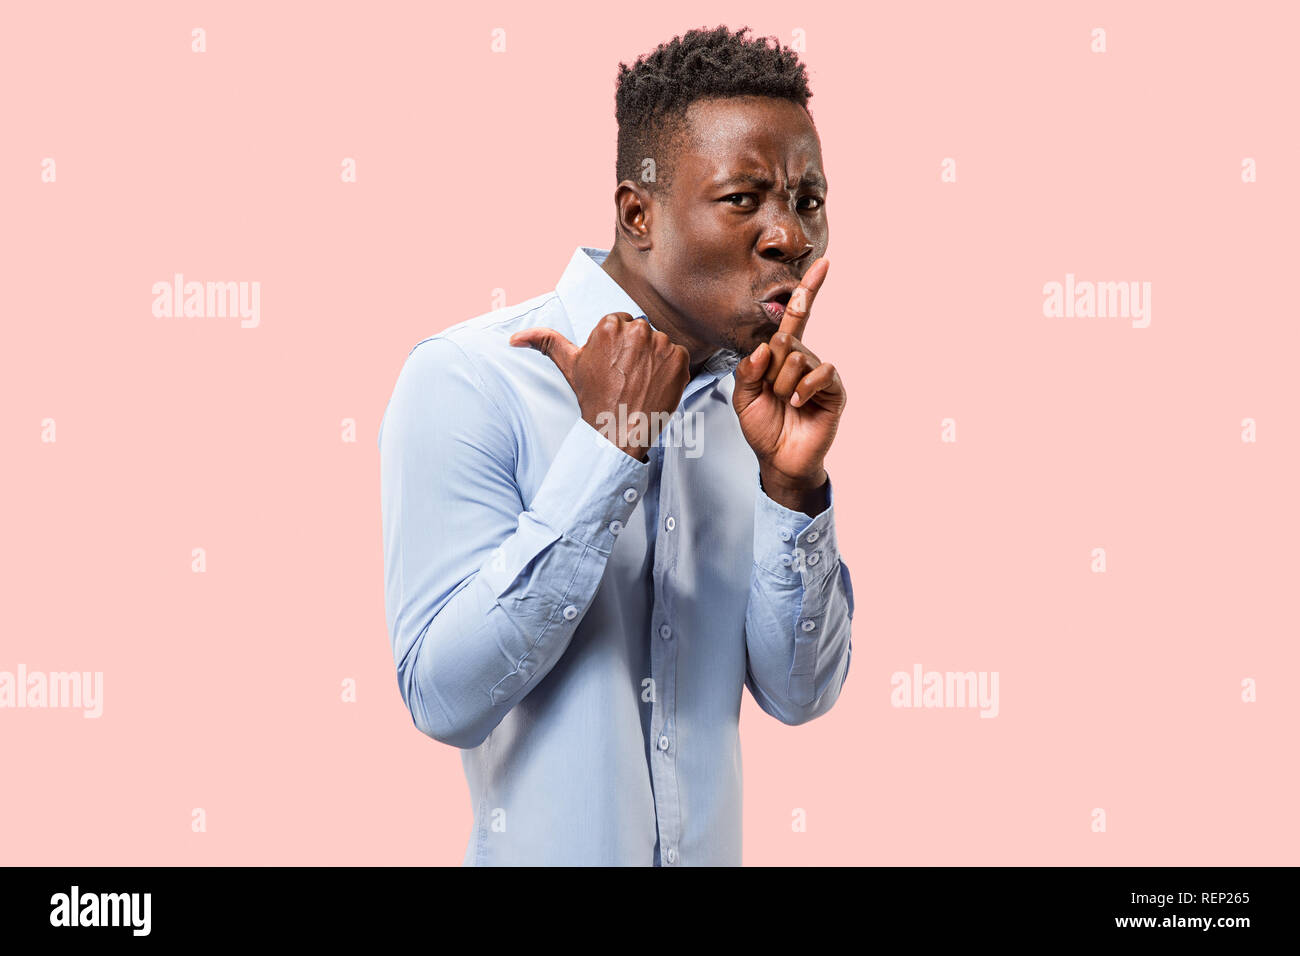 Secret, gossip concept. Young afro man whispering a secret behind his hand. Businessman isolated on trendy pink studio background. Young emotional man. Human emotions, facial expression concept. Stock Photo